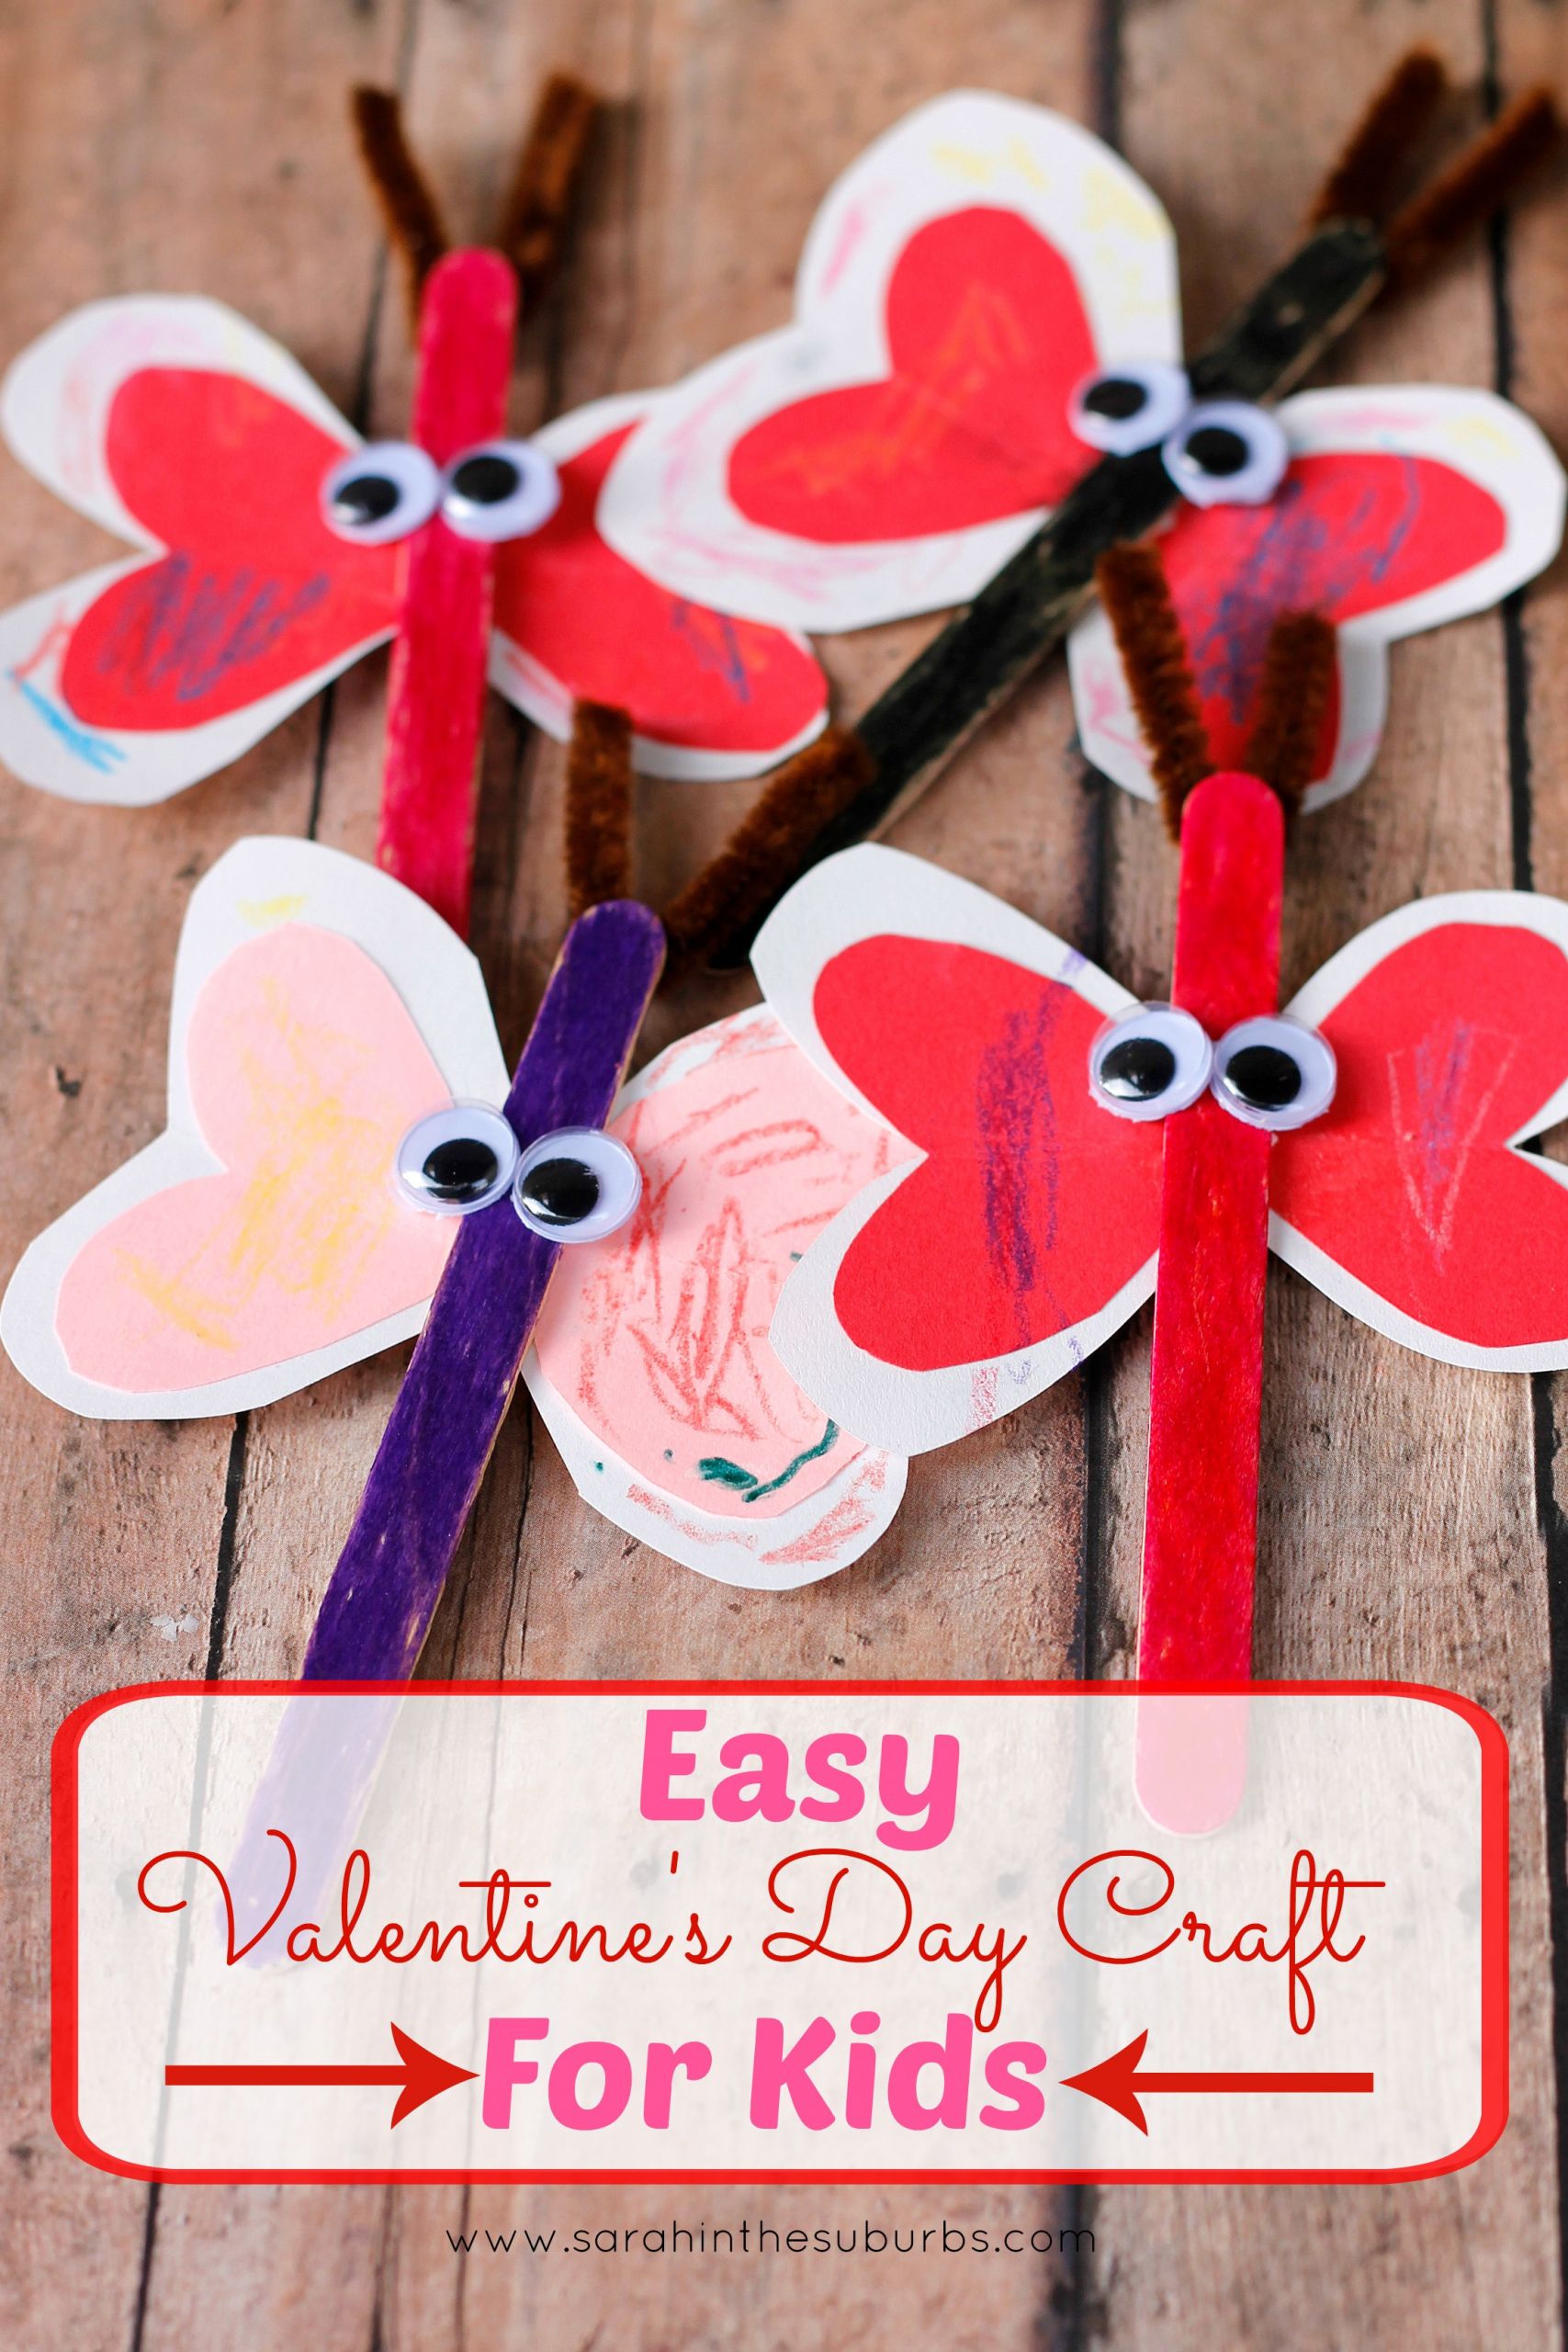 Kids Crafts Easy
 Easy Valentine s Day Craft for Kids Sarah in the Suburbs